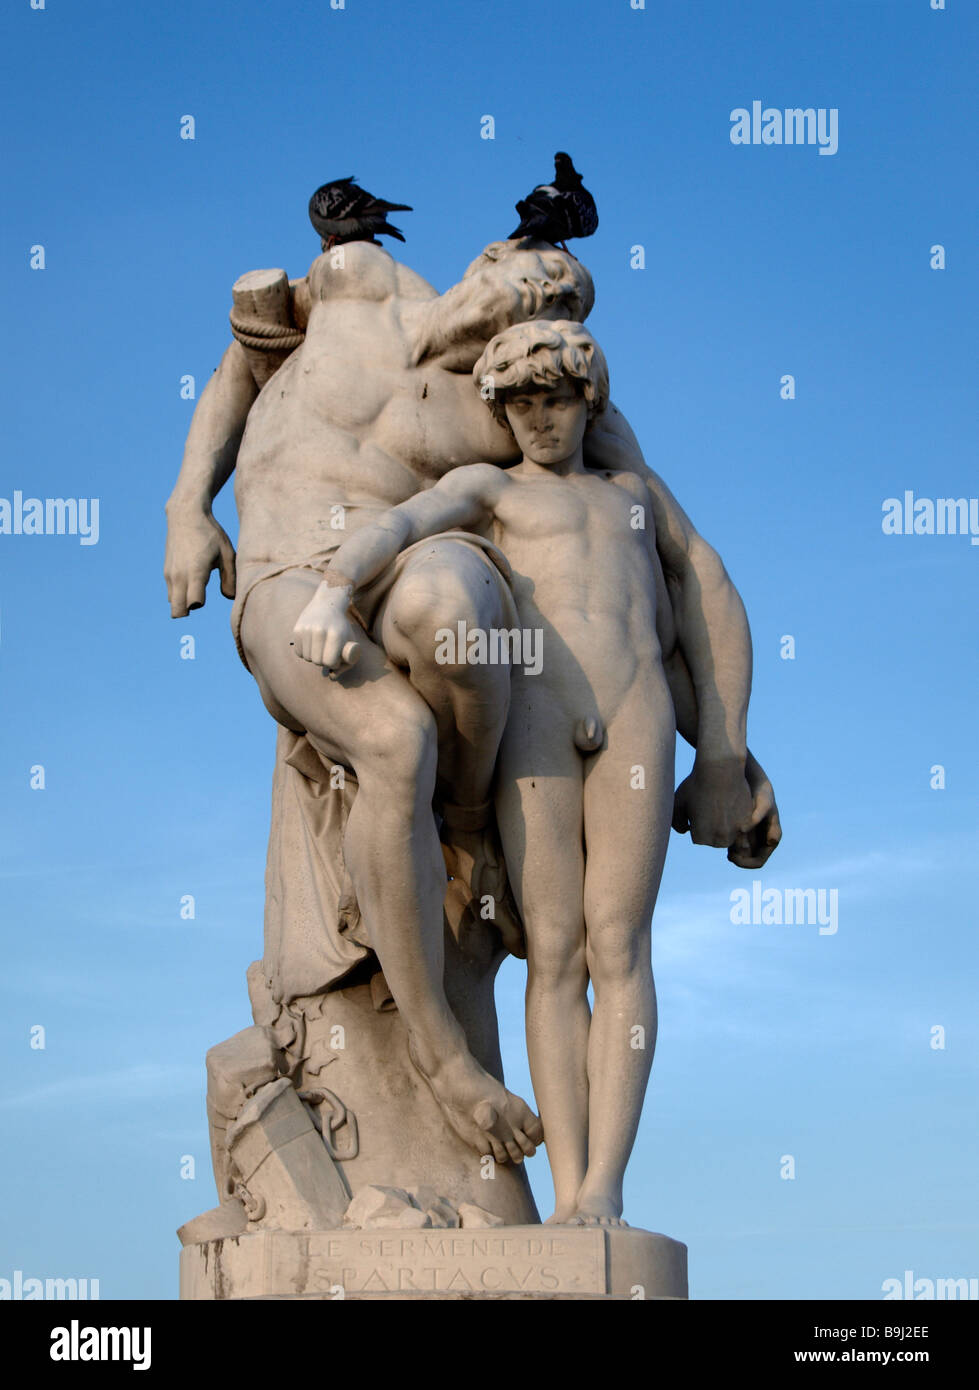 Two pigeons on a statue, male couple, boy and man, Tuileries, Paris, France, Europe Stock Photo